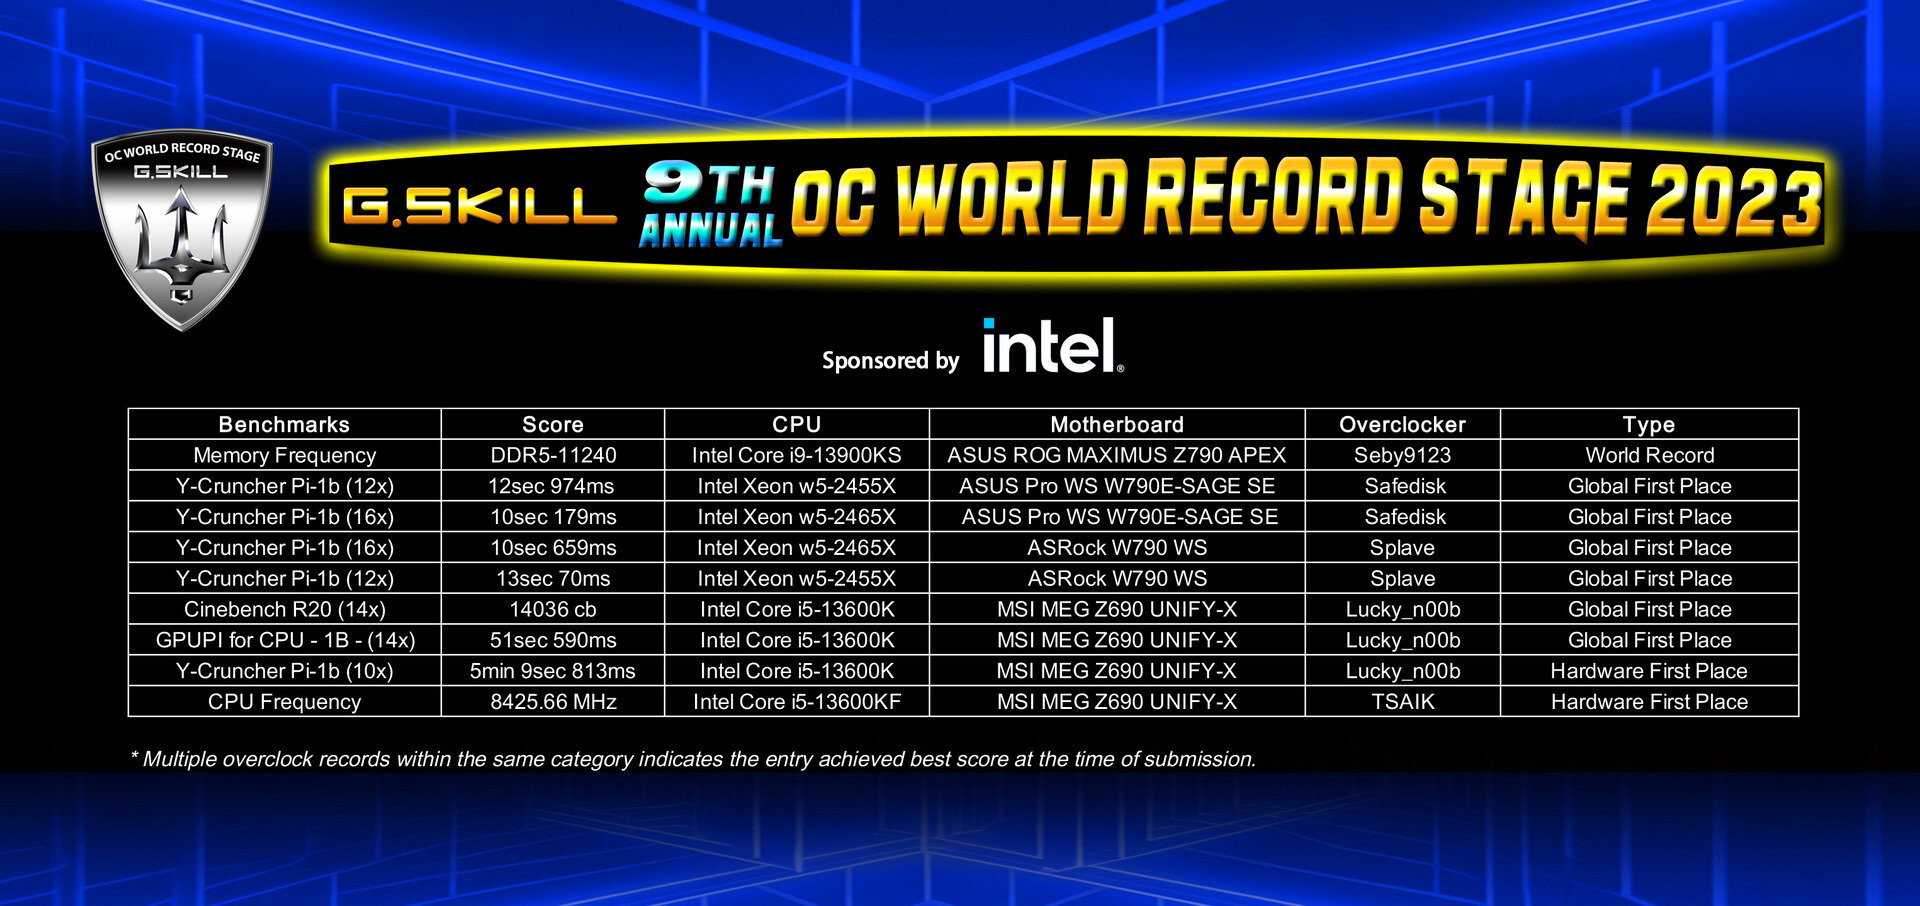 During Computex 2023, G.SKILL DDR5 Memory sets multiple overclock records and achieves DDR5-11240.